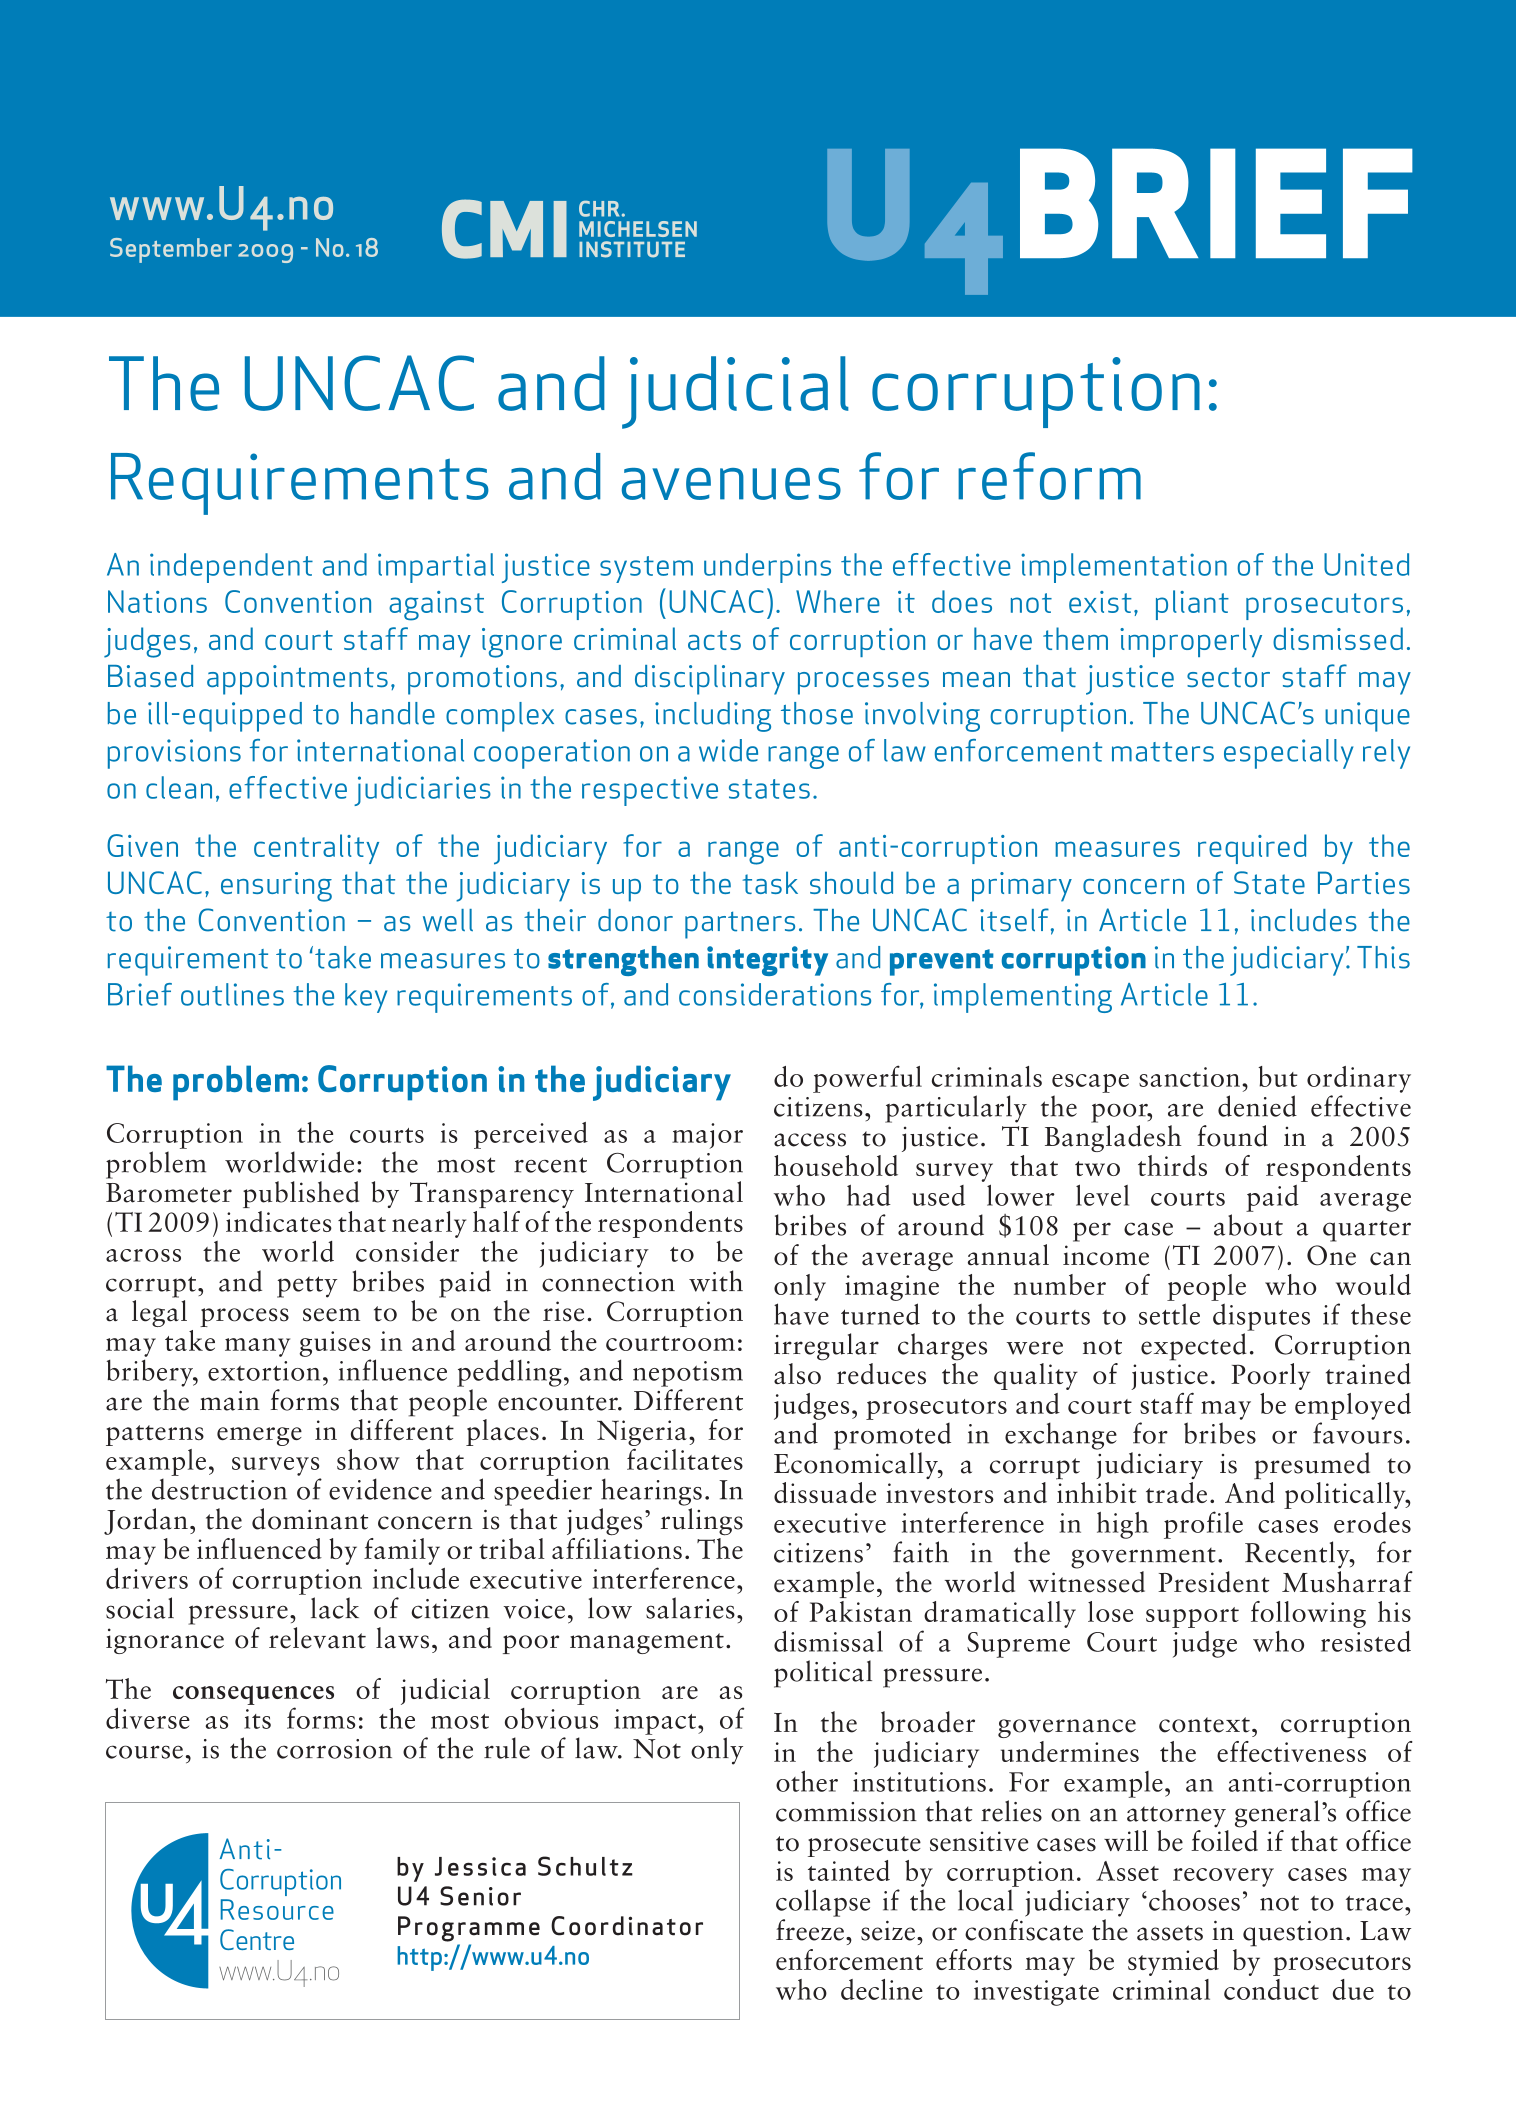 The UNCAC and judicial corruption: Requirements and avenues for reform